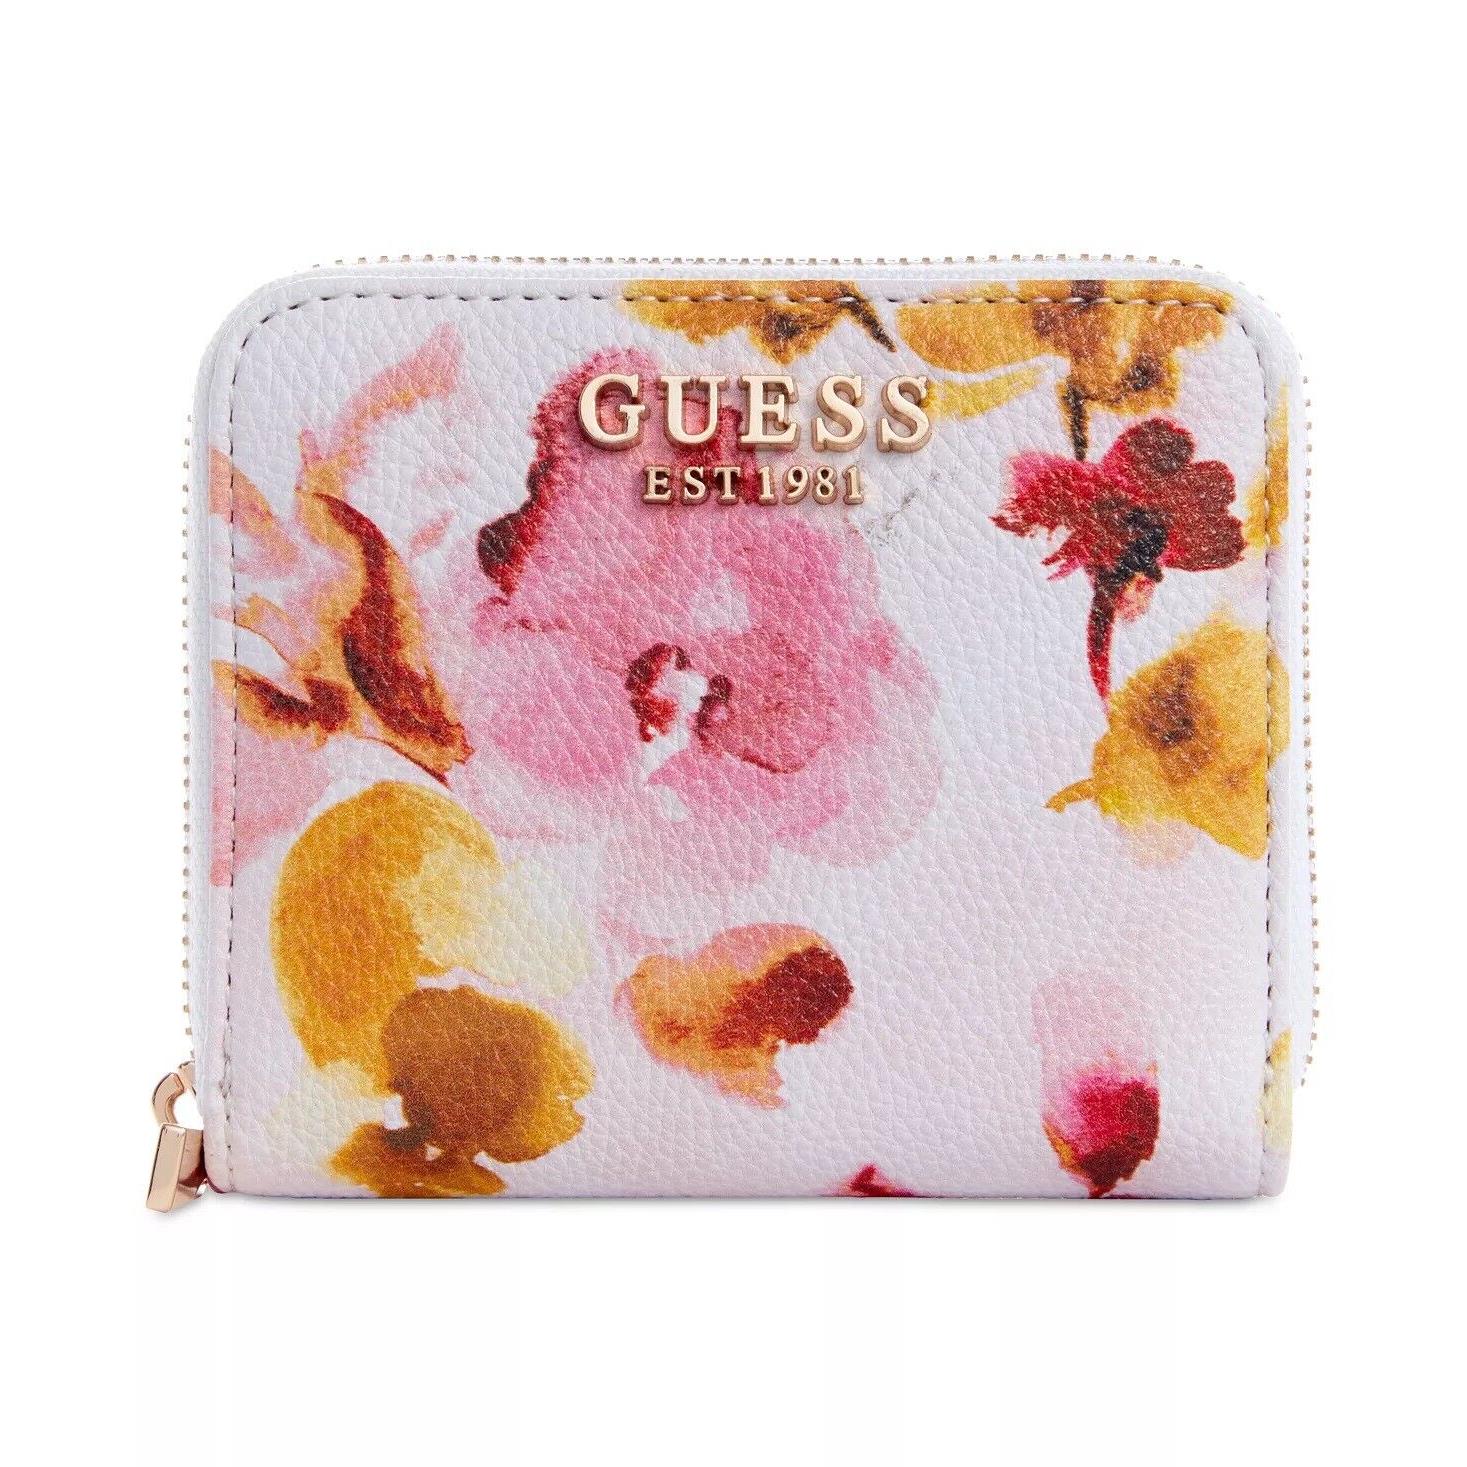 Guess Women`s White Pink Floral Small Mini Zip Around Wallet Bag + Gift Box